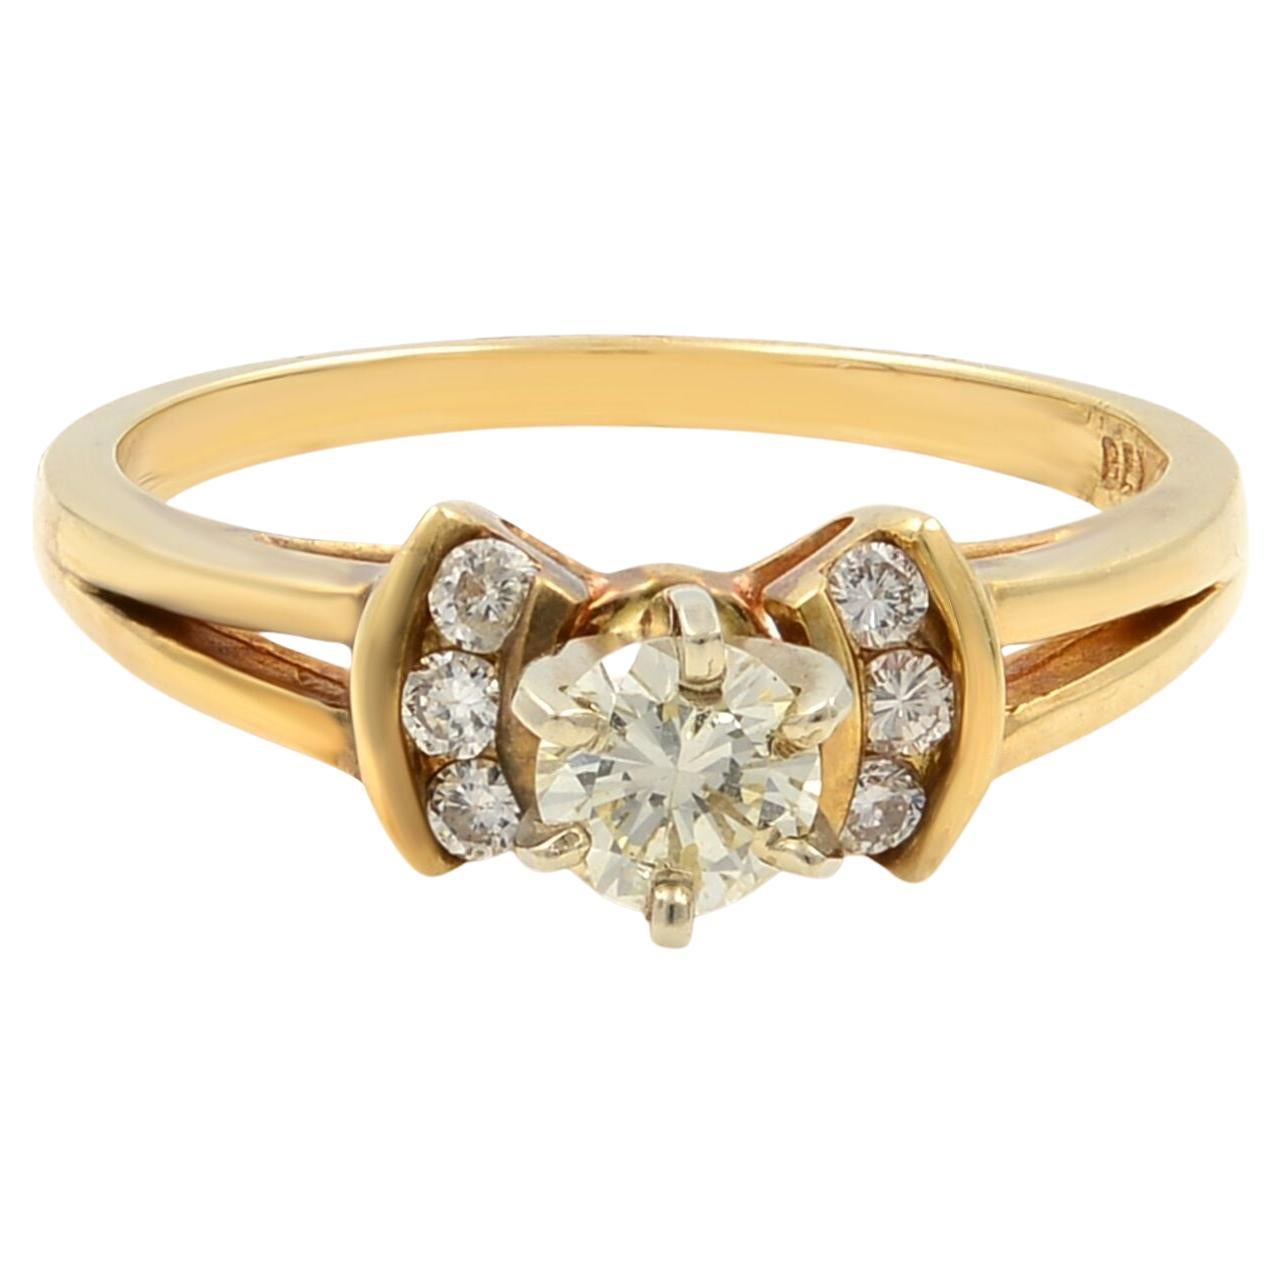 Round Cut Diamond Accented Engagement Ring 14K Yellow Gold 0.45Cttw For Sale